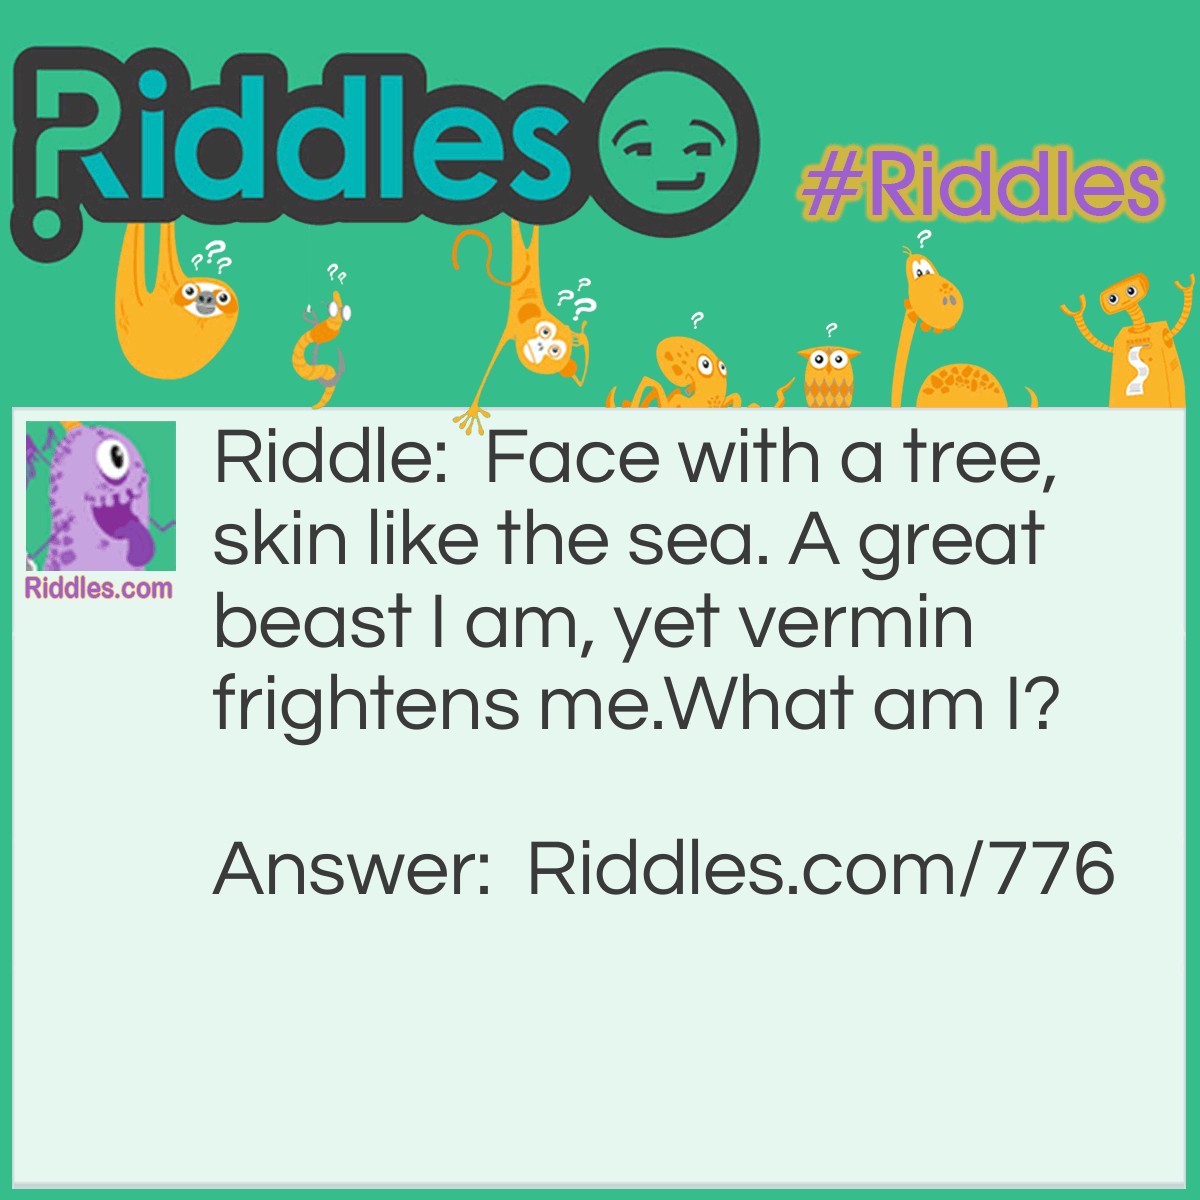 Riddle: Face with a tree, skin like the sea. A great beast I am, yet vermin frightens me.
What am I? Answer: An Elephant.